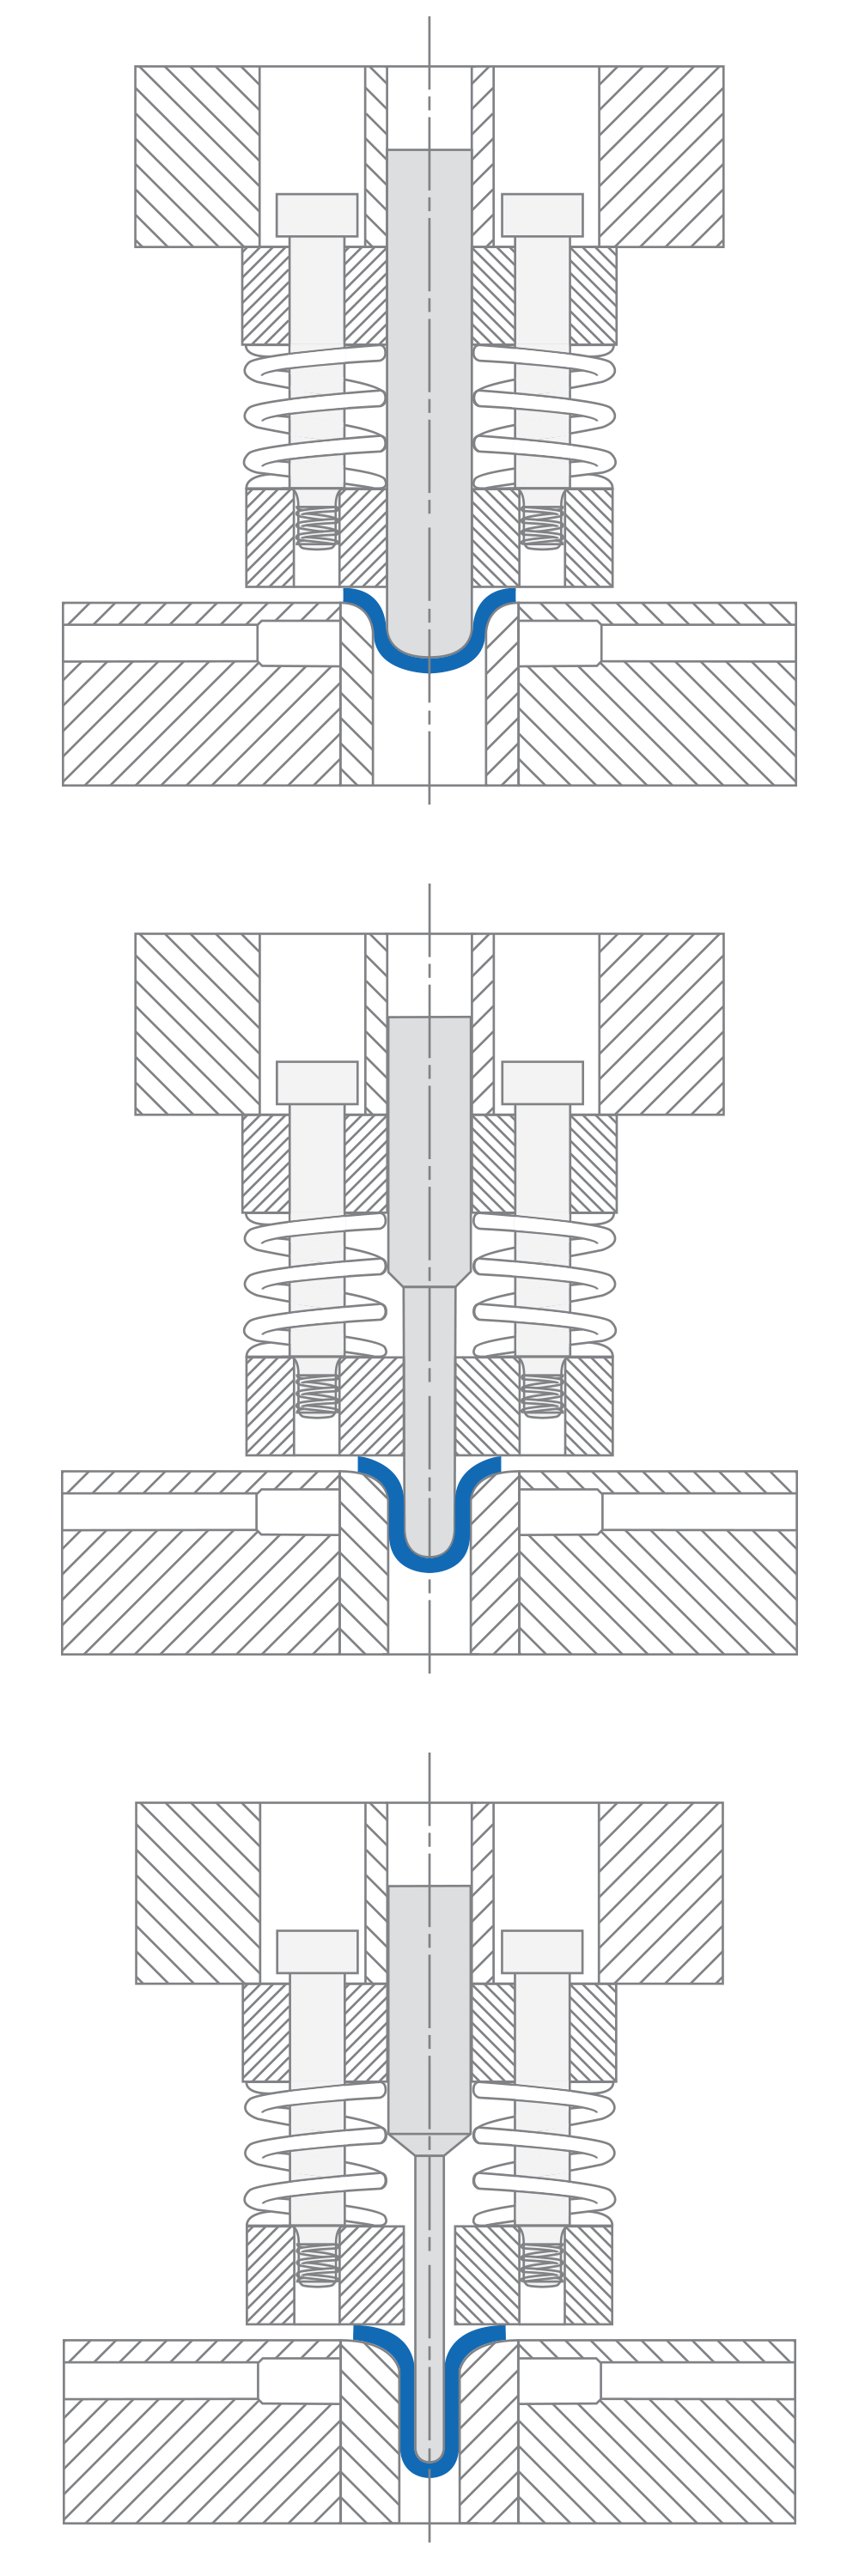 Tooling and die cross-section illustration